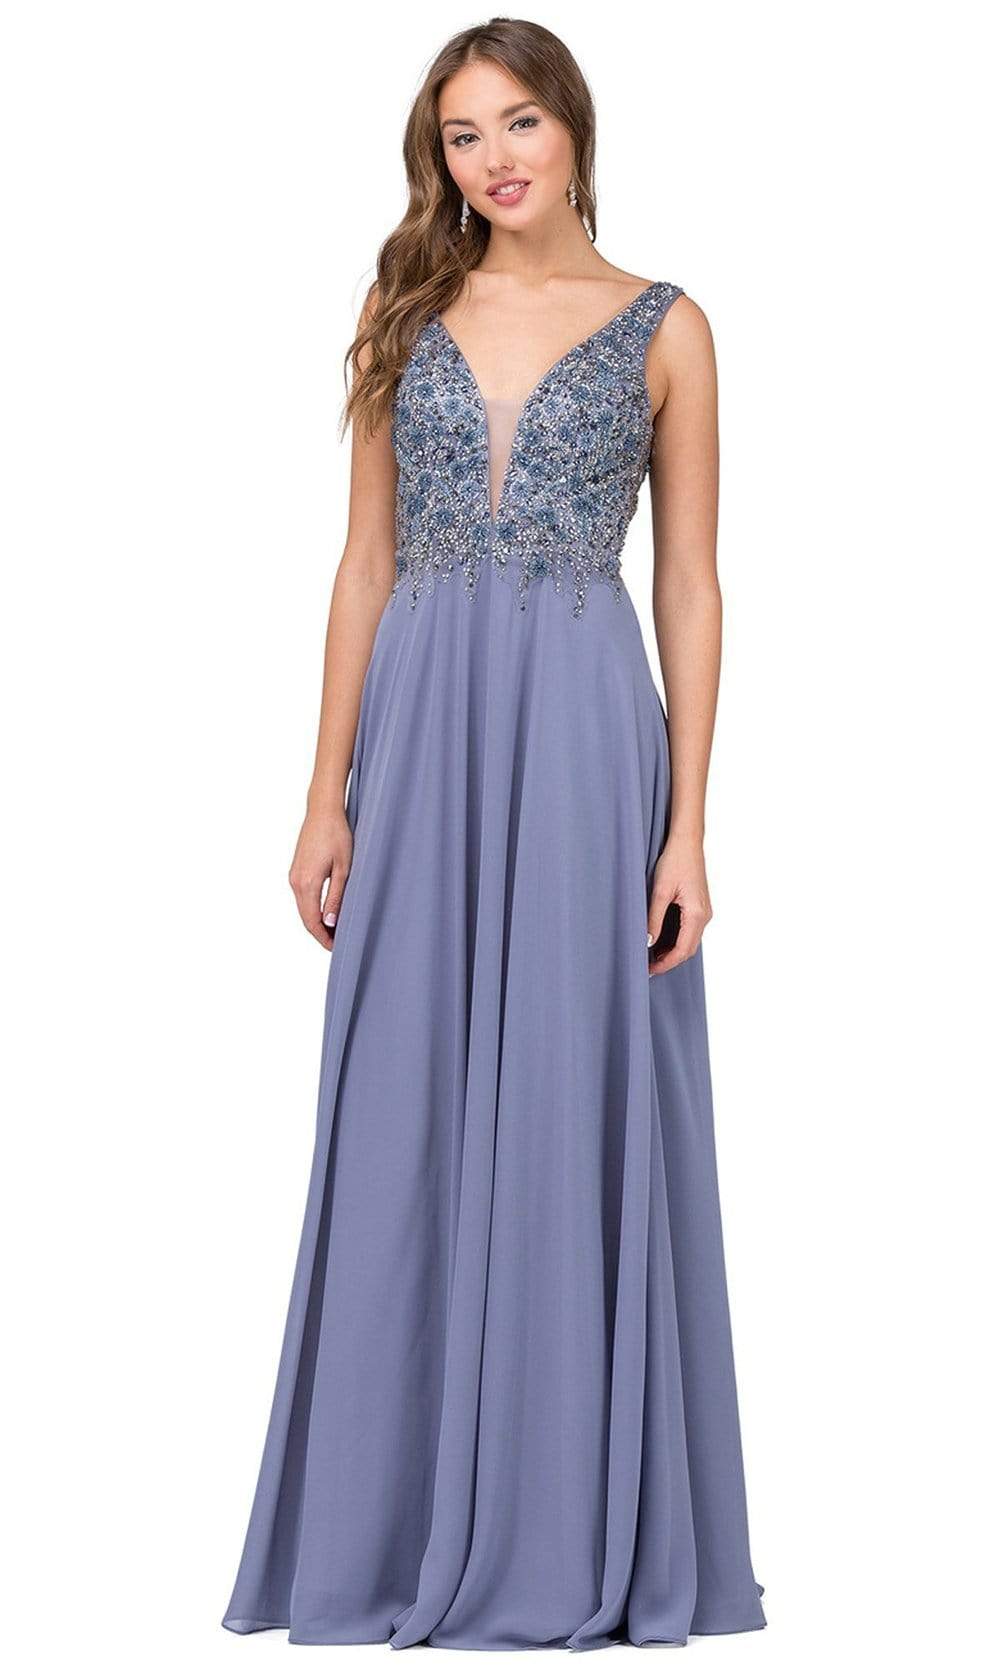 Dancing Queen - 2312 Floral Beaded Deep V-neck A-line Prom Dress Special Occasion Dress XS / Dark Silver